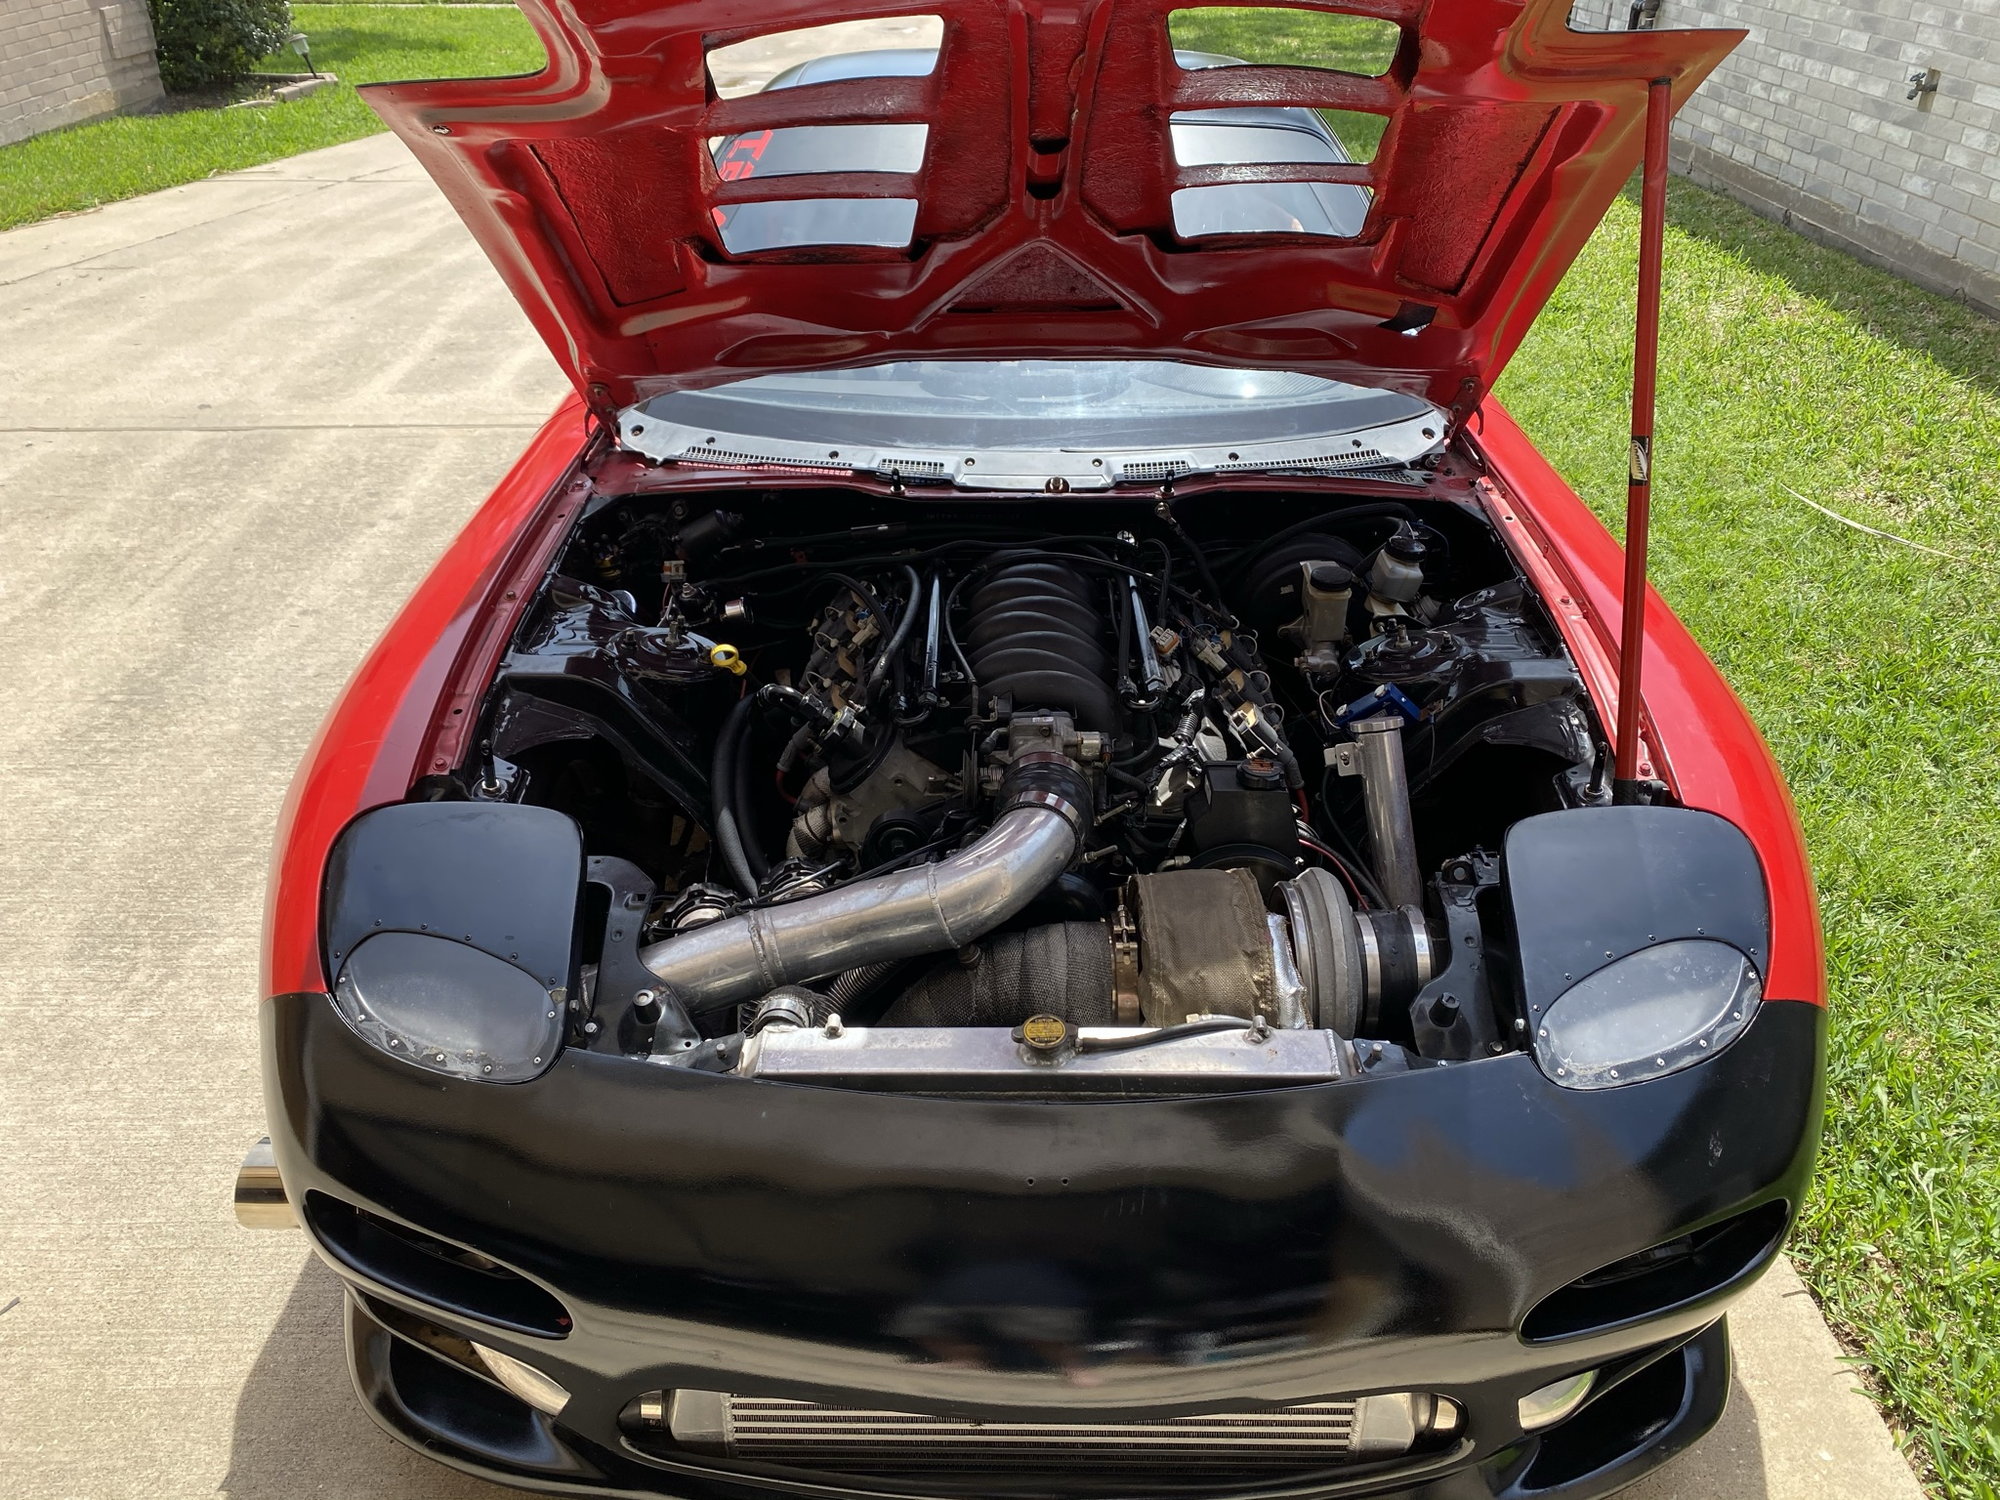 1993 Mazda RX-7 - 1993 RX-7 793RWHP Turbo/LS 6.0 Stroker (408) Proven 200MPH Car - Used - VIN JM1FD331XP0208496 - 8 cyl - 2WD - Manual - Coupe - Red - Pearland, TX 77581, United States